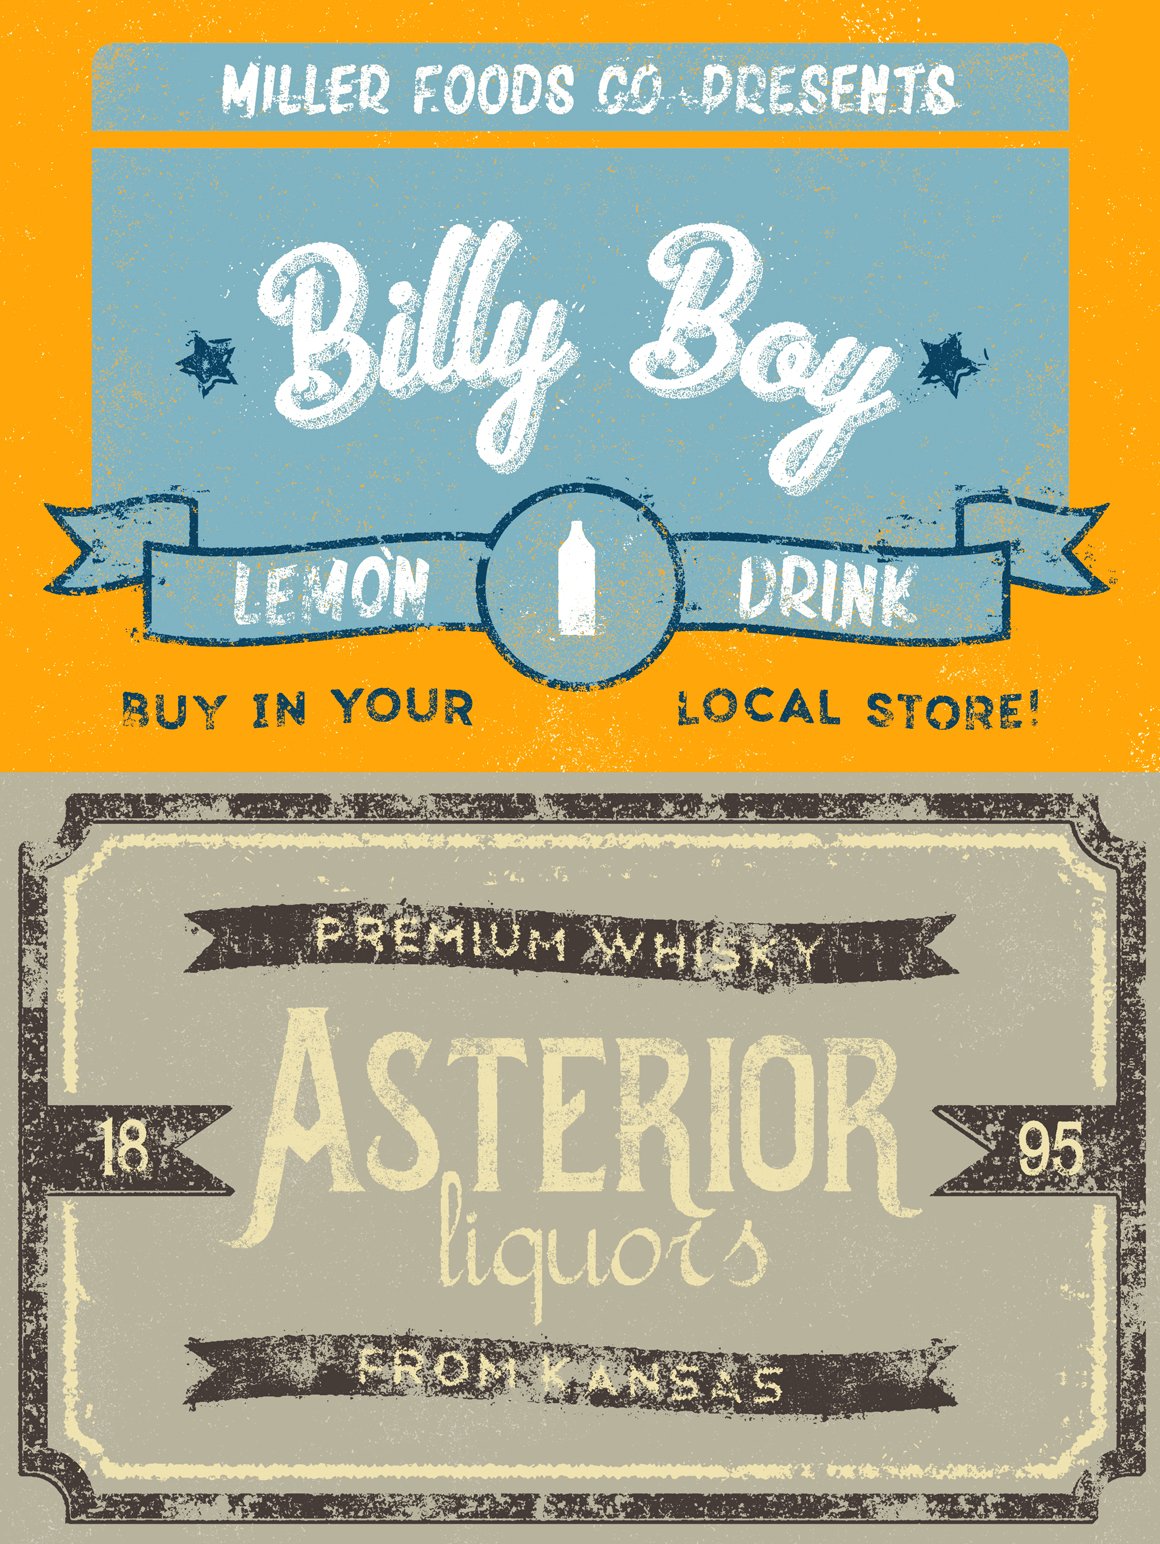 Ghost Signs for Adobe Illustrator